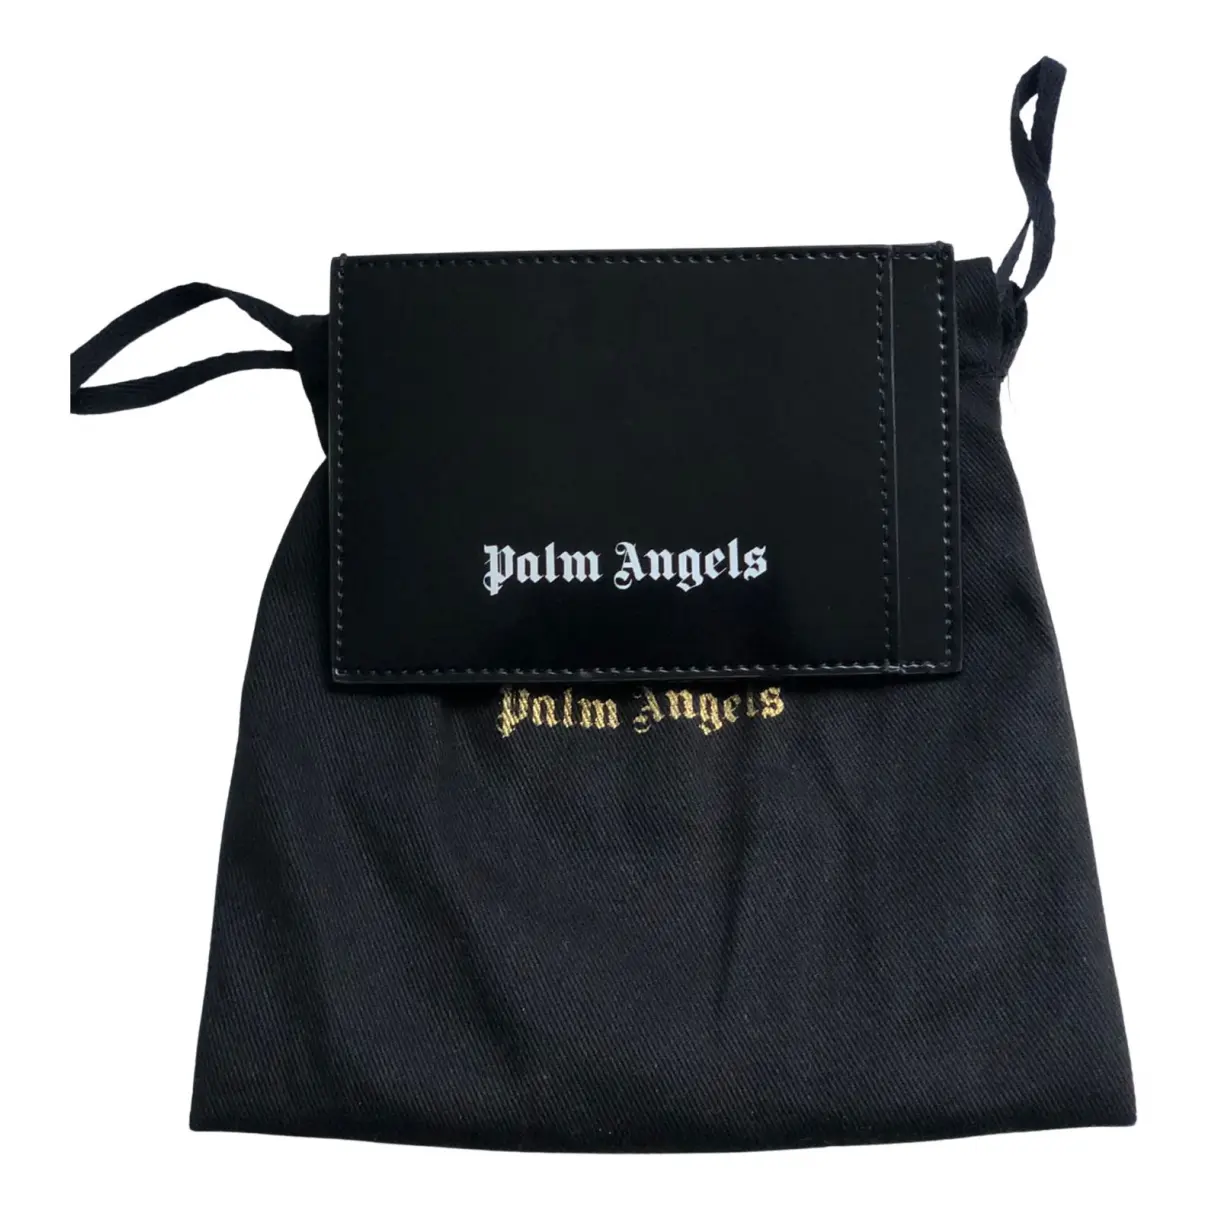 Patent leather small bag Palm Angels